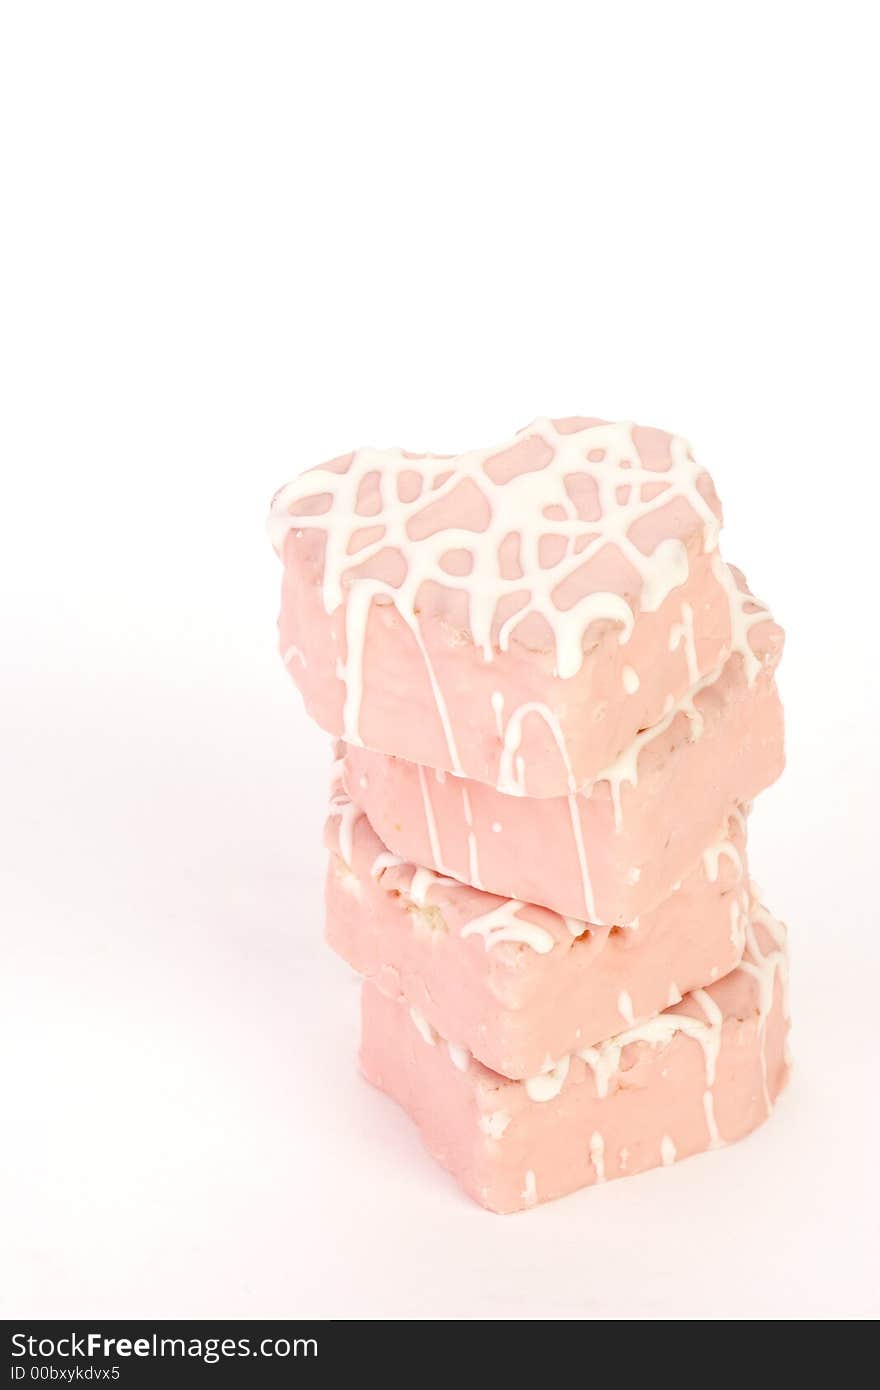 Stack of four pink heart snack cakes with white frosting. Stack of four pink heart snack cakes with white frosting